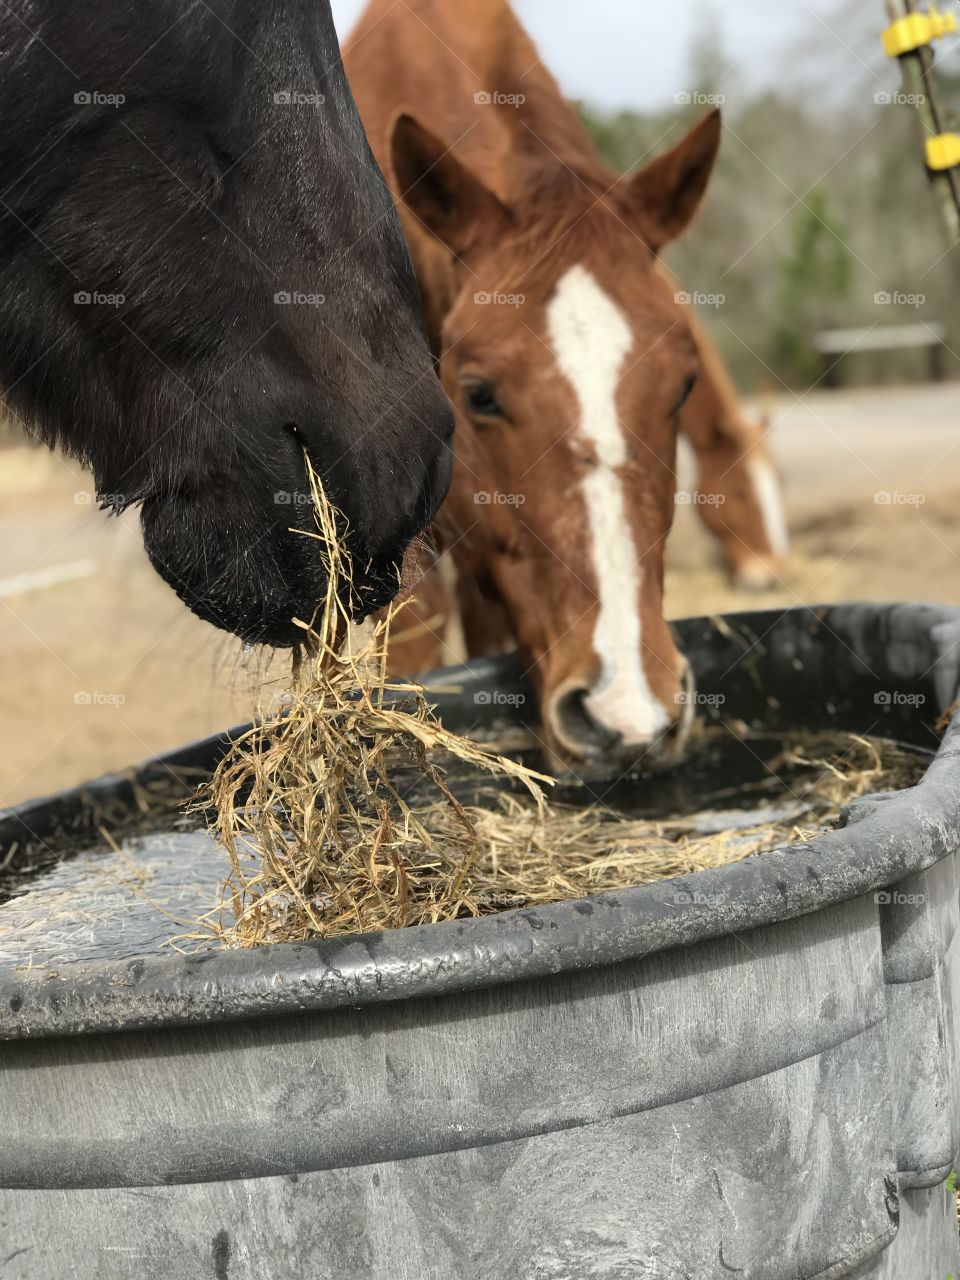 Horse wetting his hay prior to eating it. 